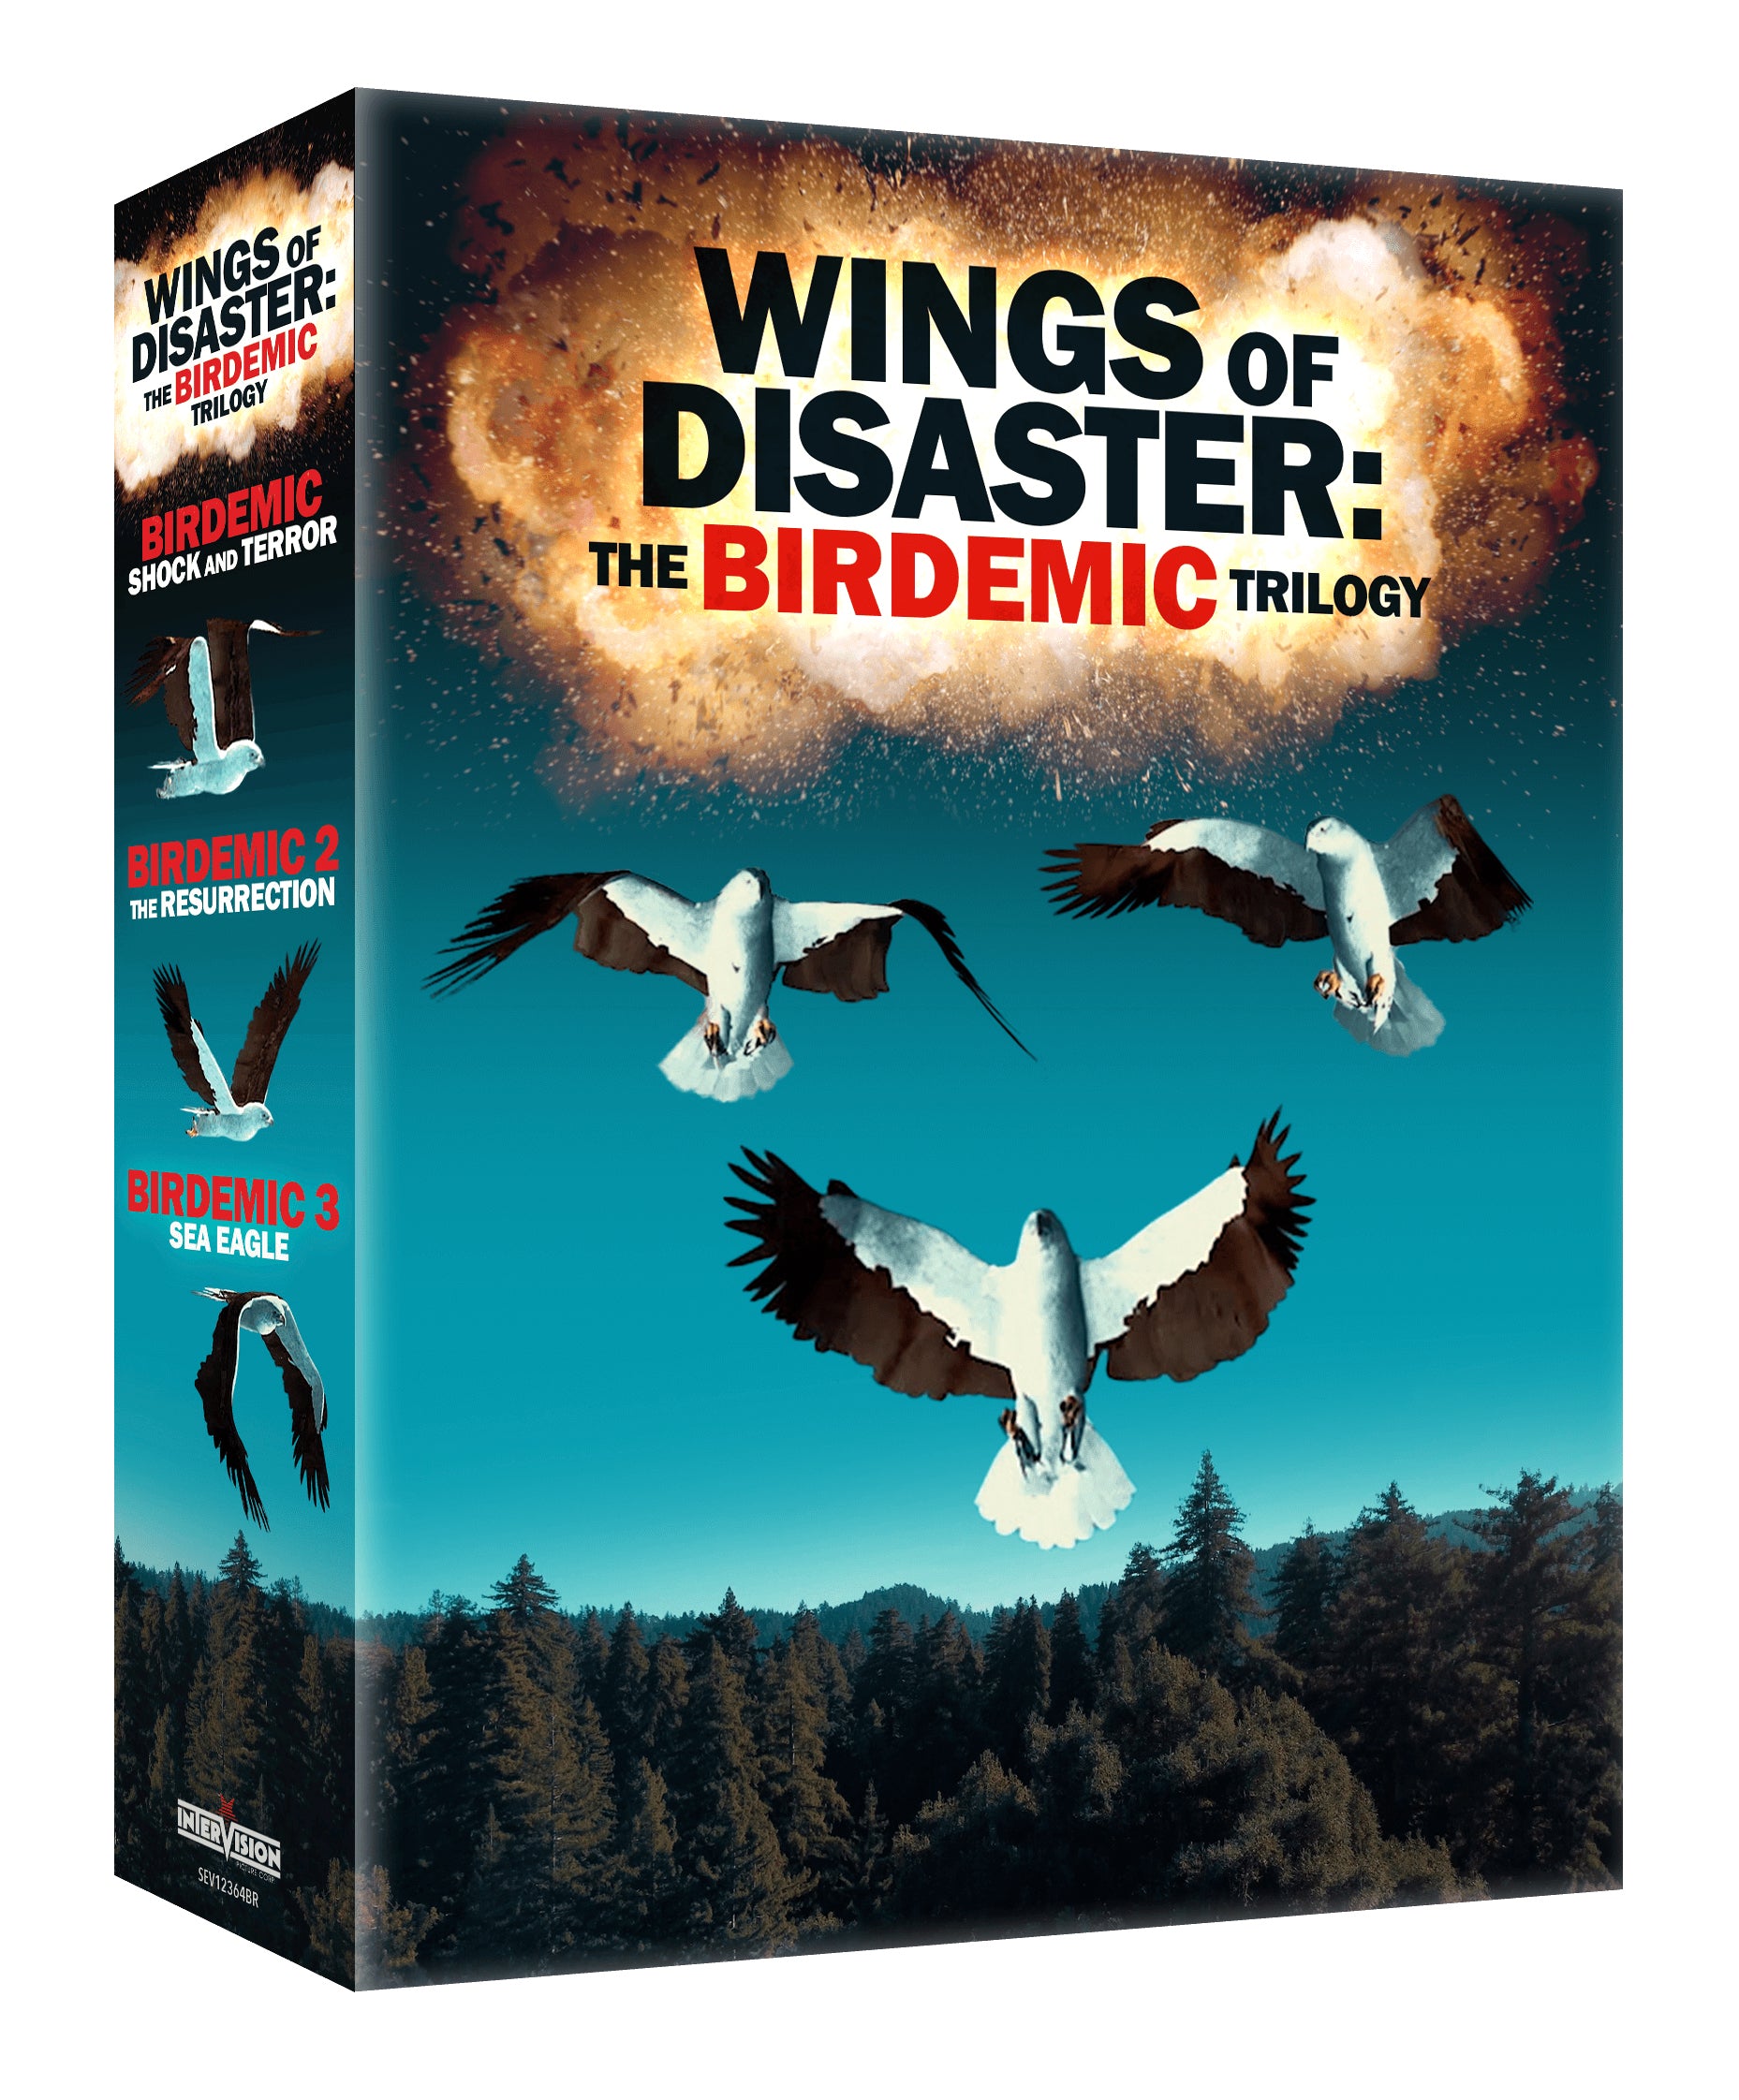 WINGS OF DISASTER: THE BIRDEMIC TRILOGY BLU-RAY